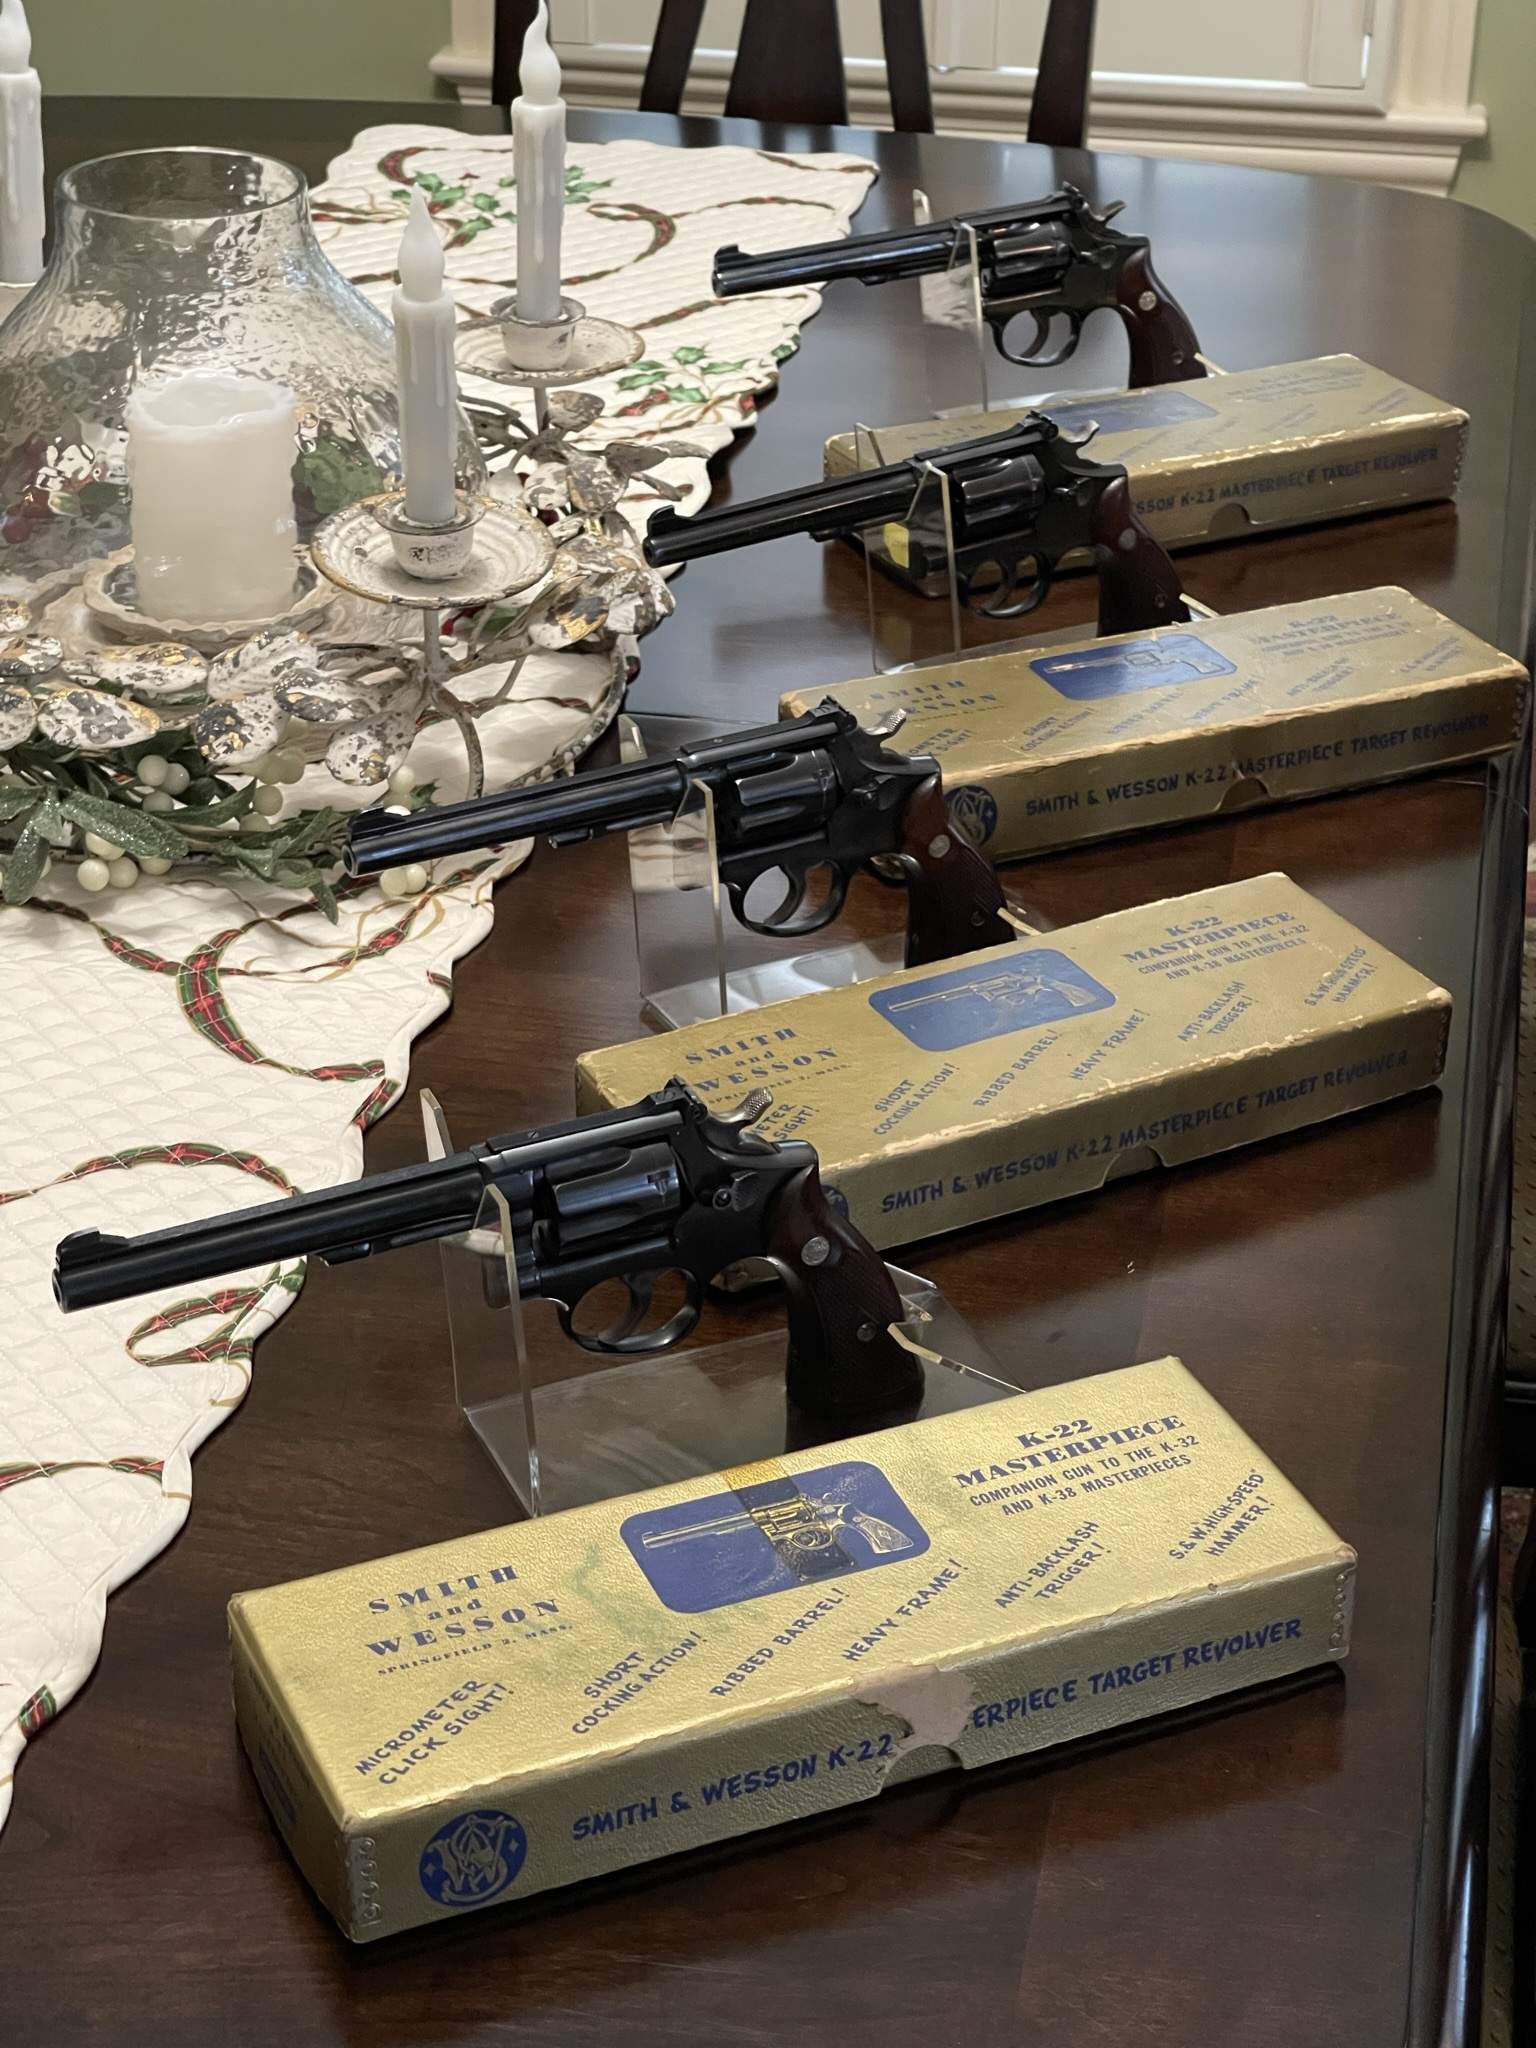 Third Model Guns lined up in a row